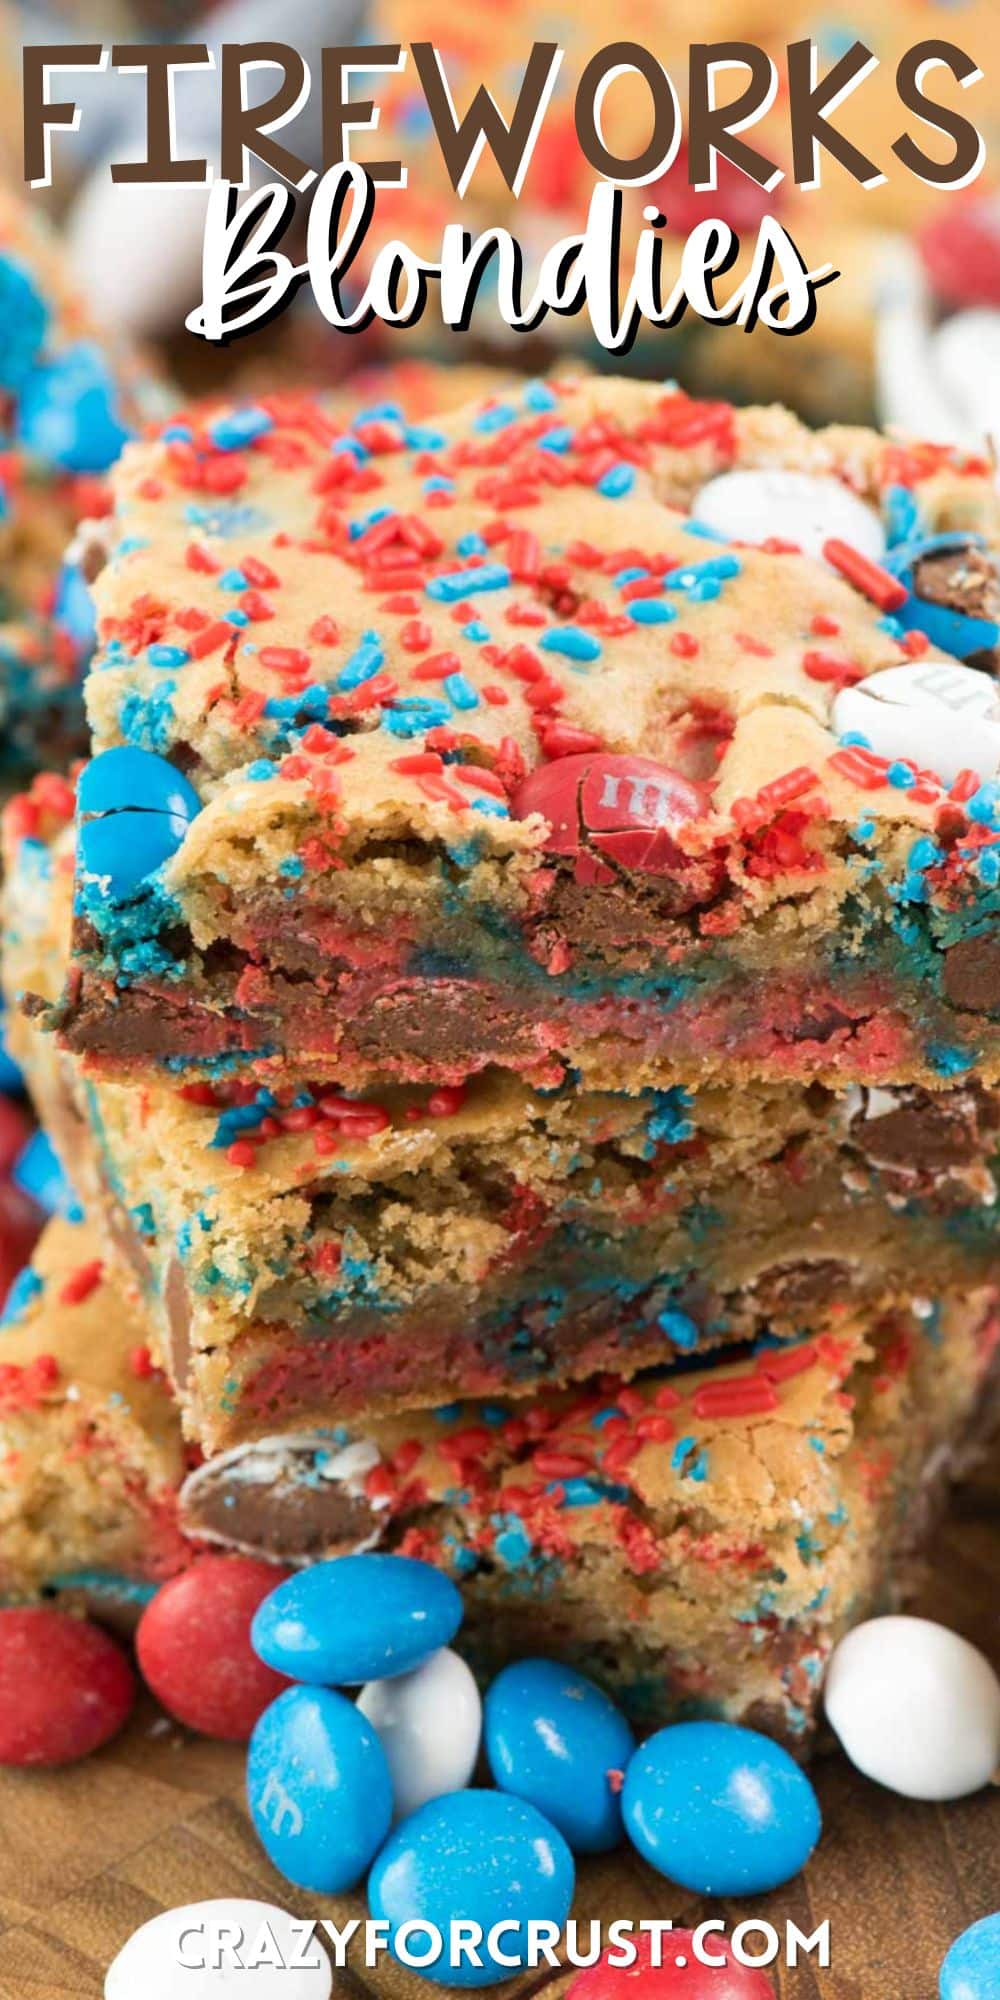 stacked blondies with red white and blue sprinkles mixed in with words on the image.